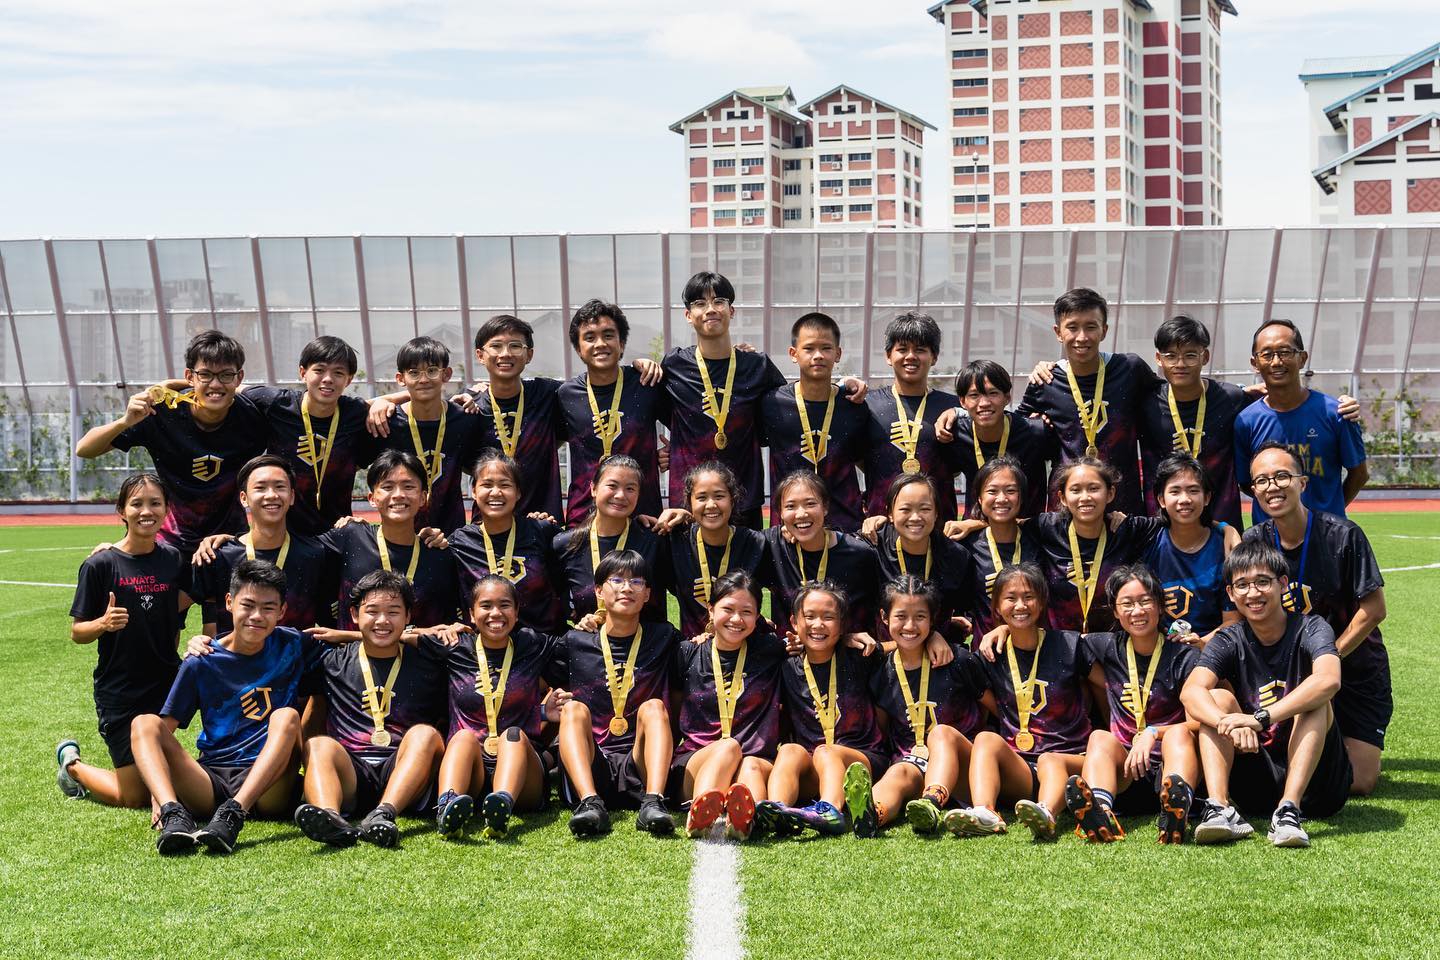 Inter-JCs #Ultimate: After a dominant first half display, Eunoia Junior College (pic) defeated Catholic Junior College 8-2 in the final on home turf to win their school’s first ever title.

Story to come on REDSPORTS.SG. (Photo by Bryan Foo/Red Sports)